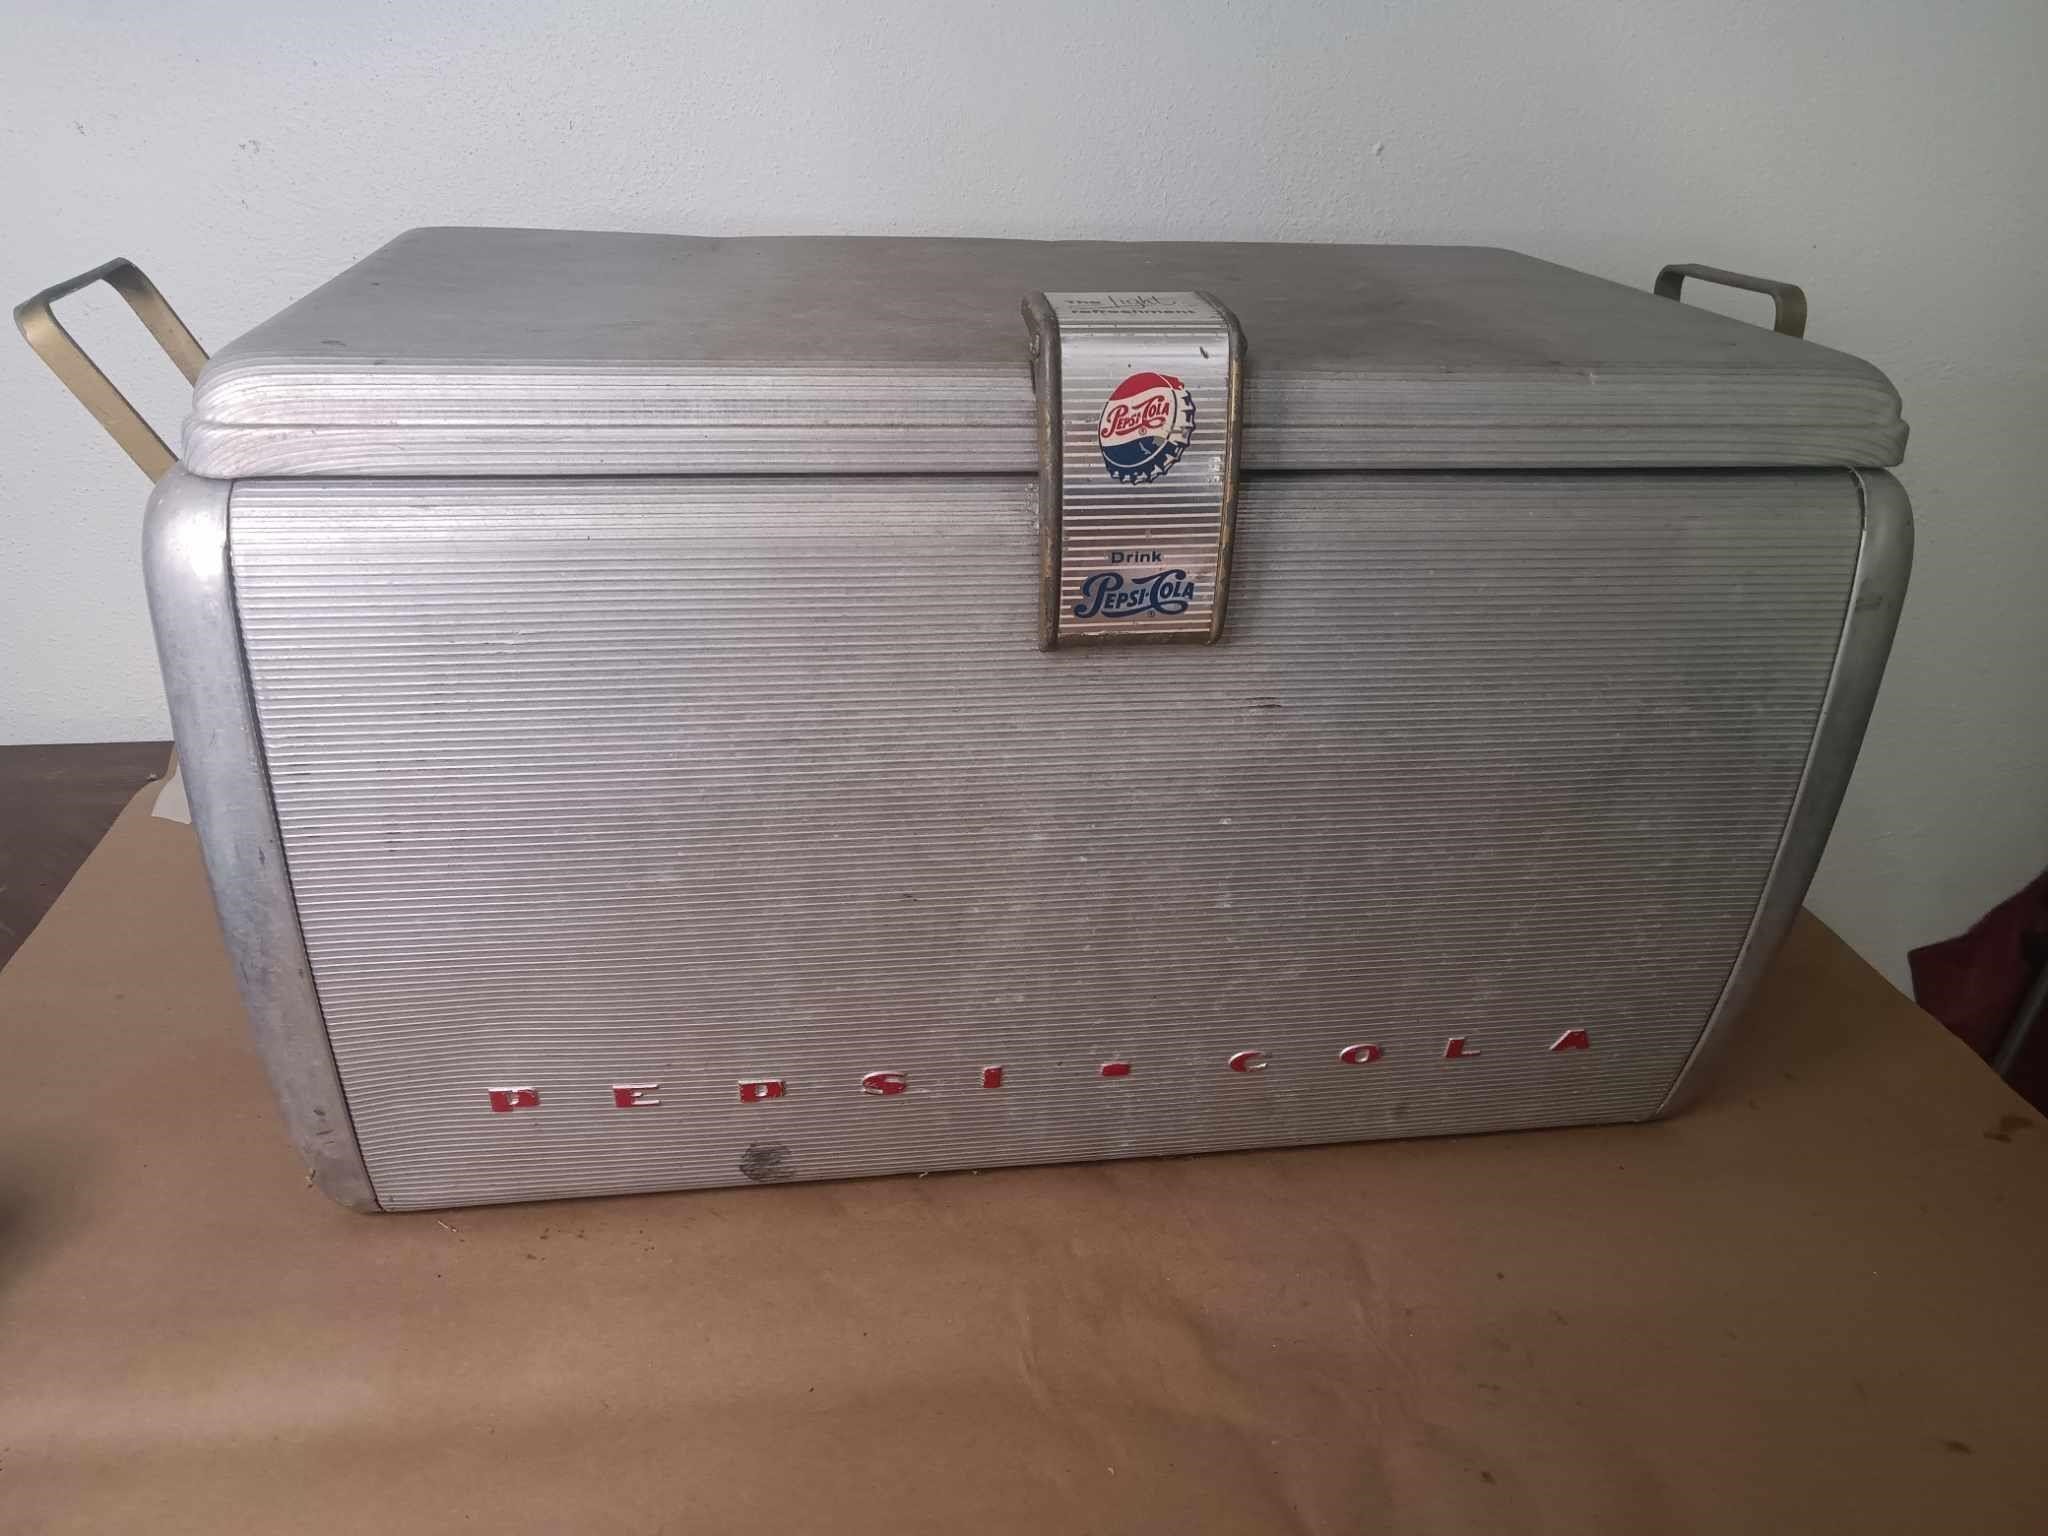 VTG PEPSI METAL COOLER WITH SHELF IN AWESOME SHAPE